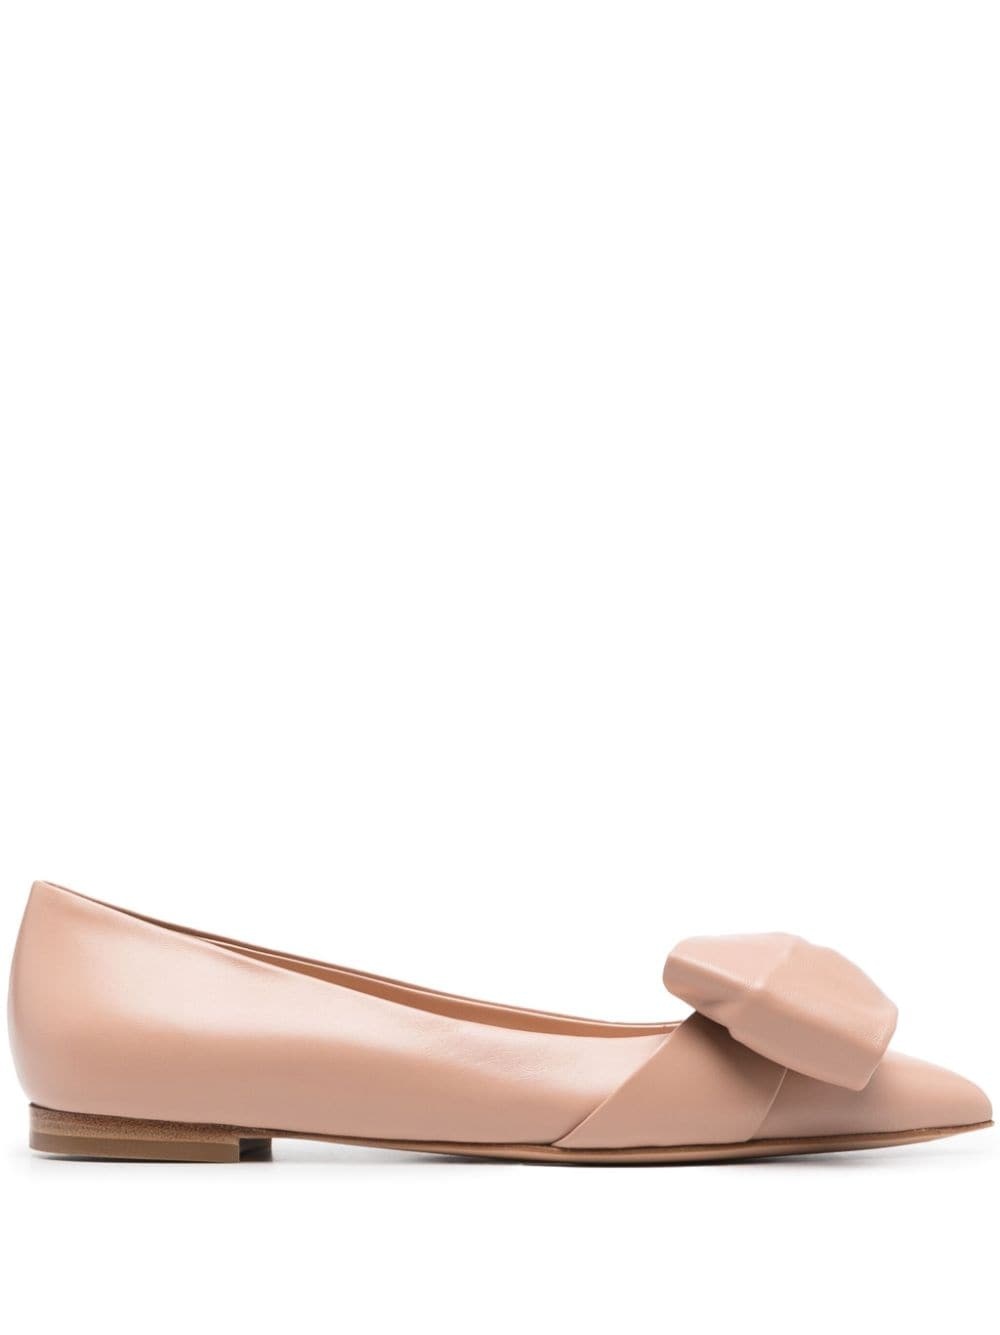 bow-detail leather ballerina shoes - 1